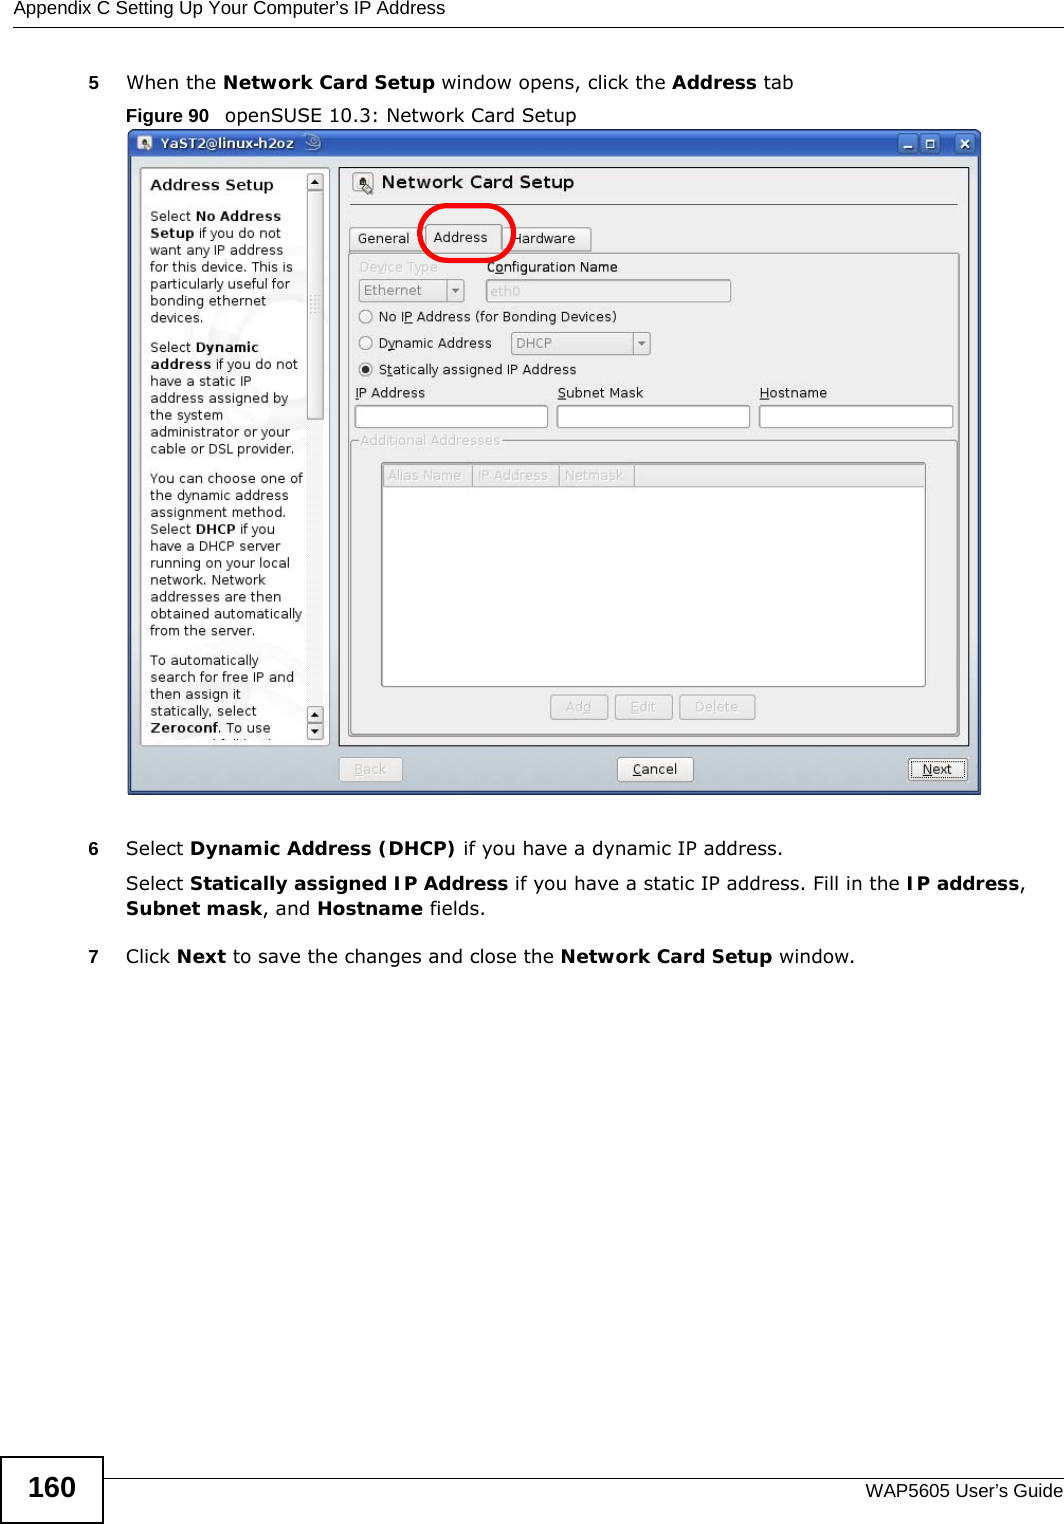 Appendix C Setting Up Your Computer’s IP AddressWAP5605 User’s Guide1605When the Network Card Setup window opens, click the Address tabFigure 90   openSUSE 10.3: Network Card Setup6Select Dynamic Address (DHCP) if you have a dynamic IP address.Select Statically assigned IP Address if you have a static IP address. Fill in the IP address, Subnet mask, and Hostname fields.7Click Next to save the changes and close the Network Card Setup window. 